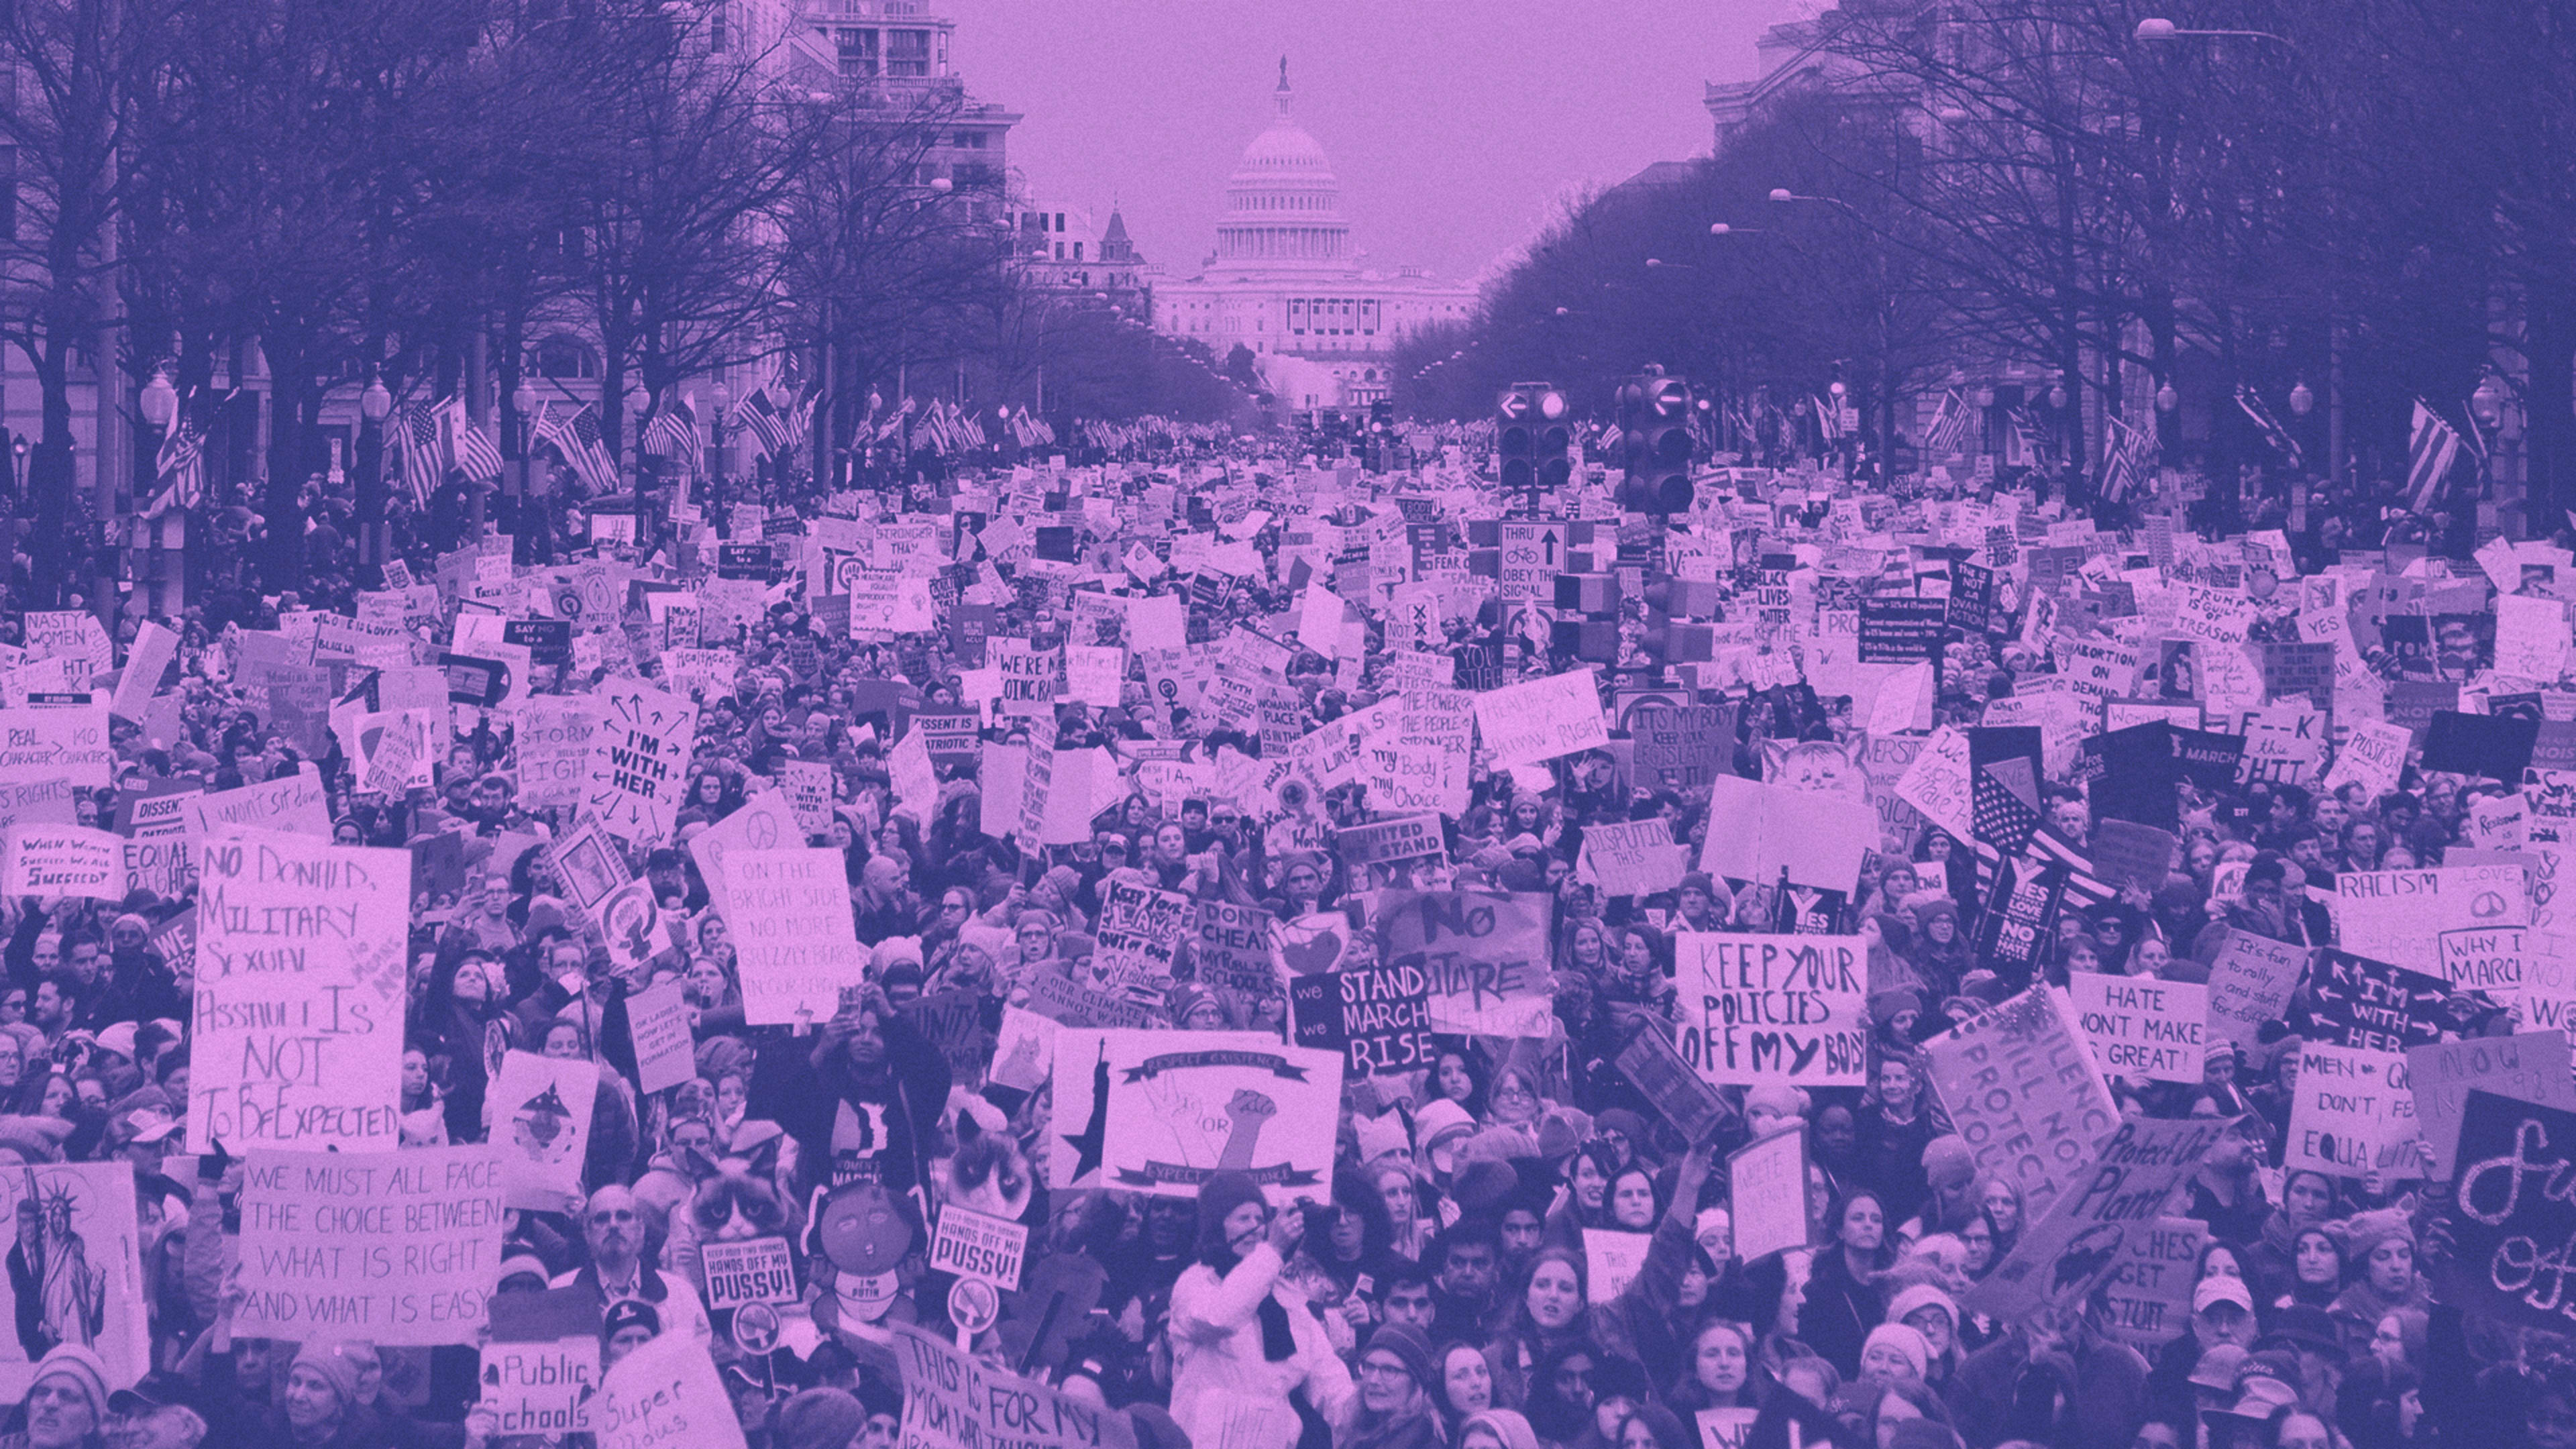 Keep marching: Why street protests really do make a difference